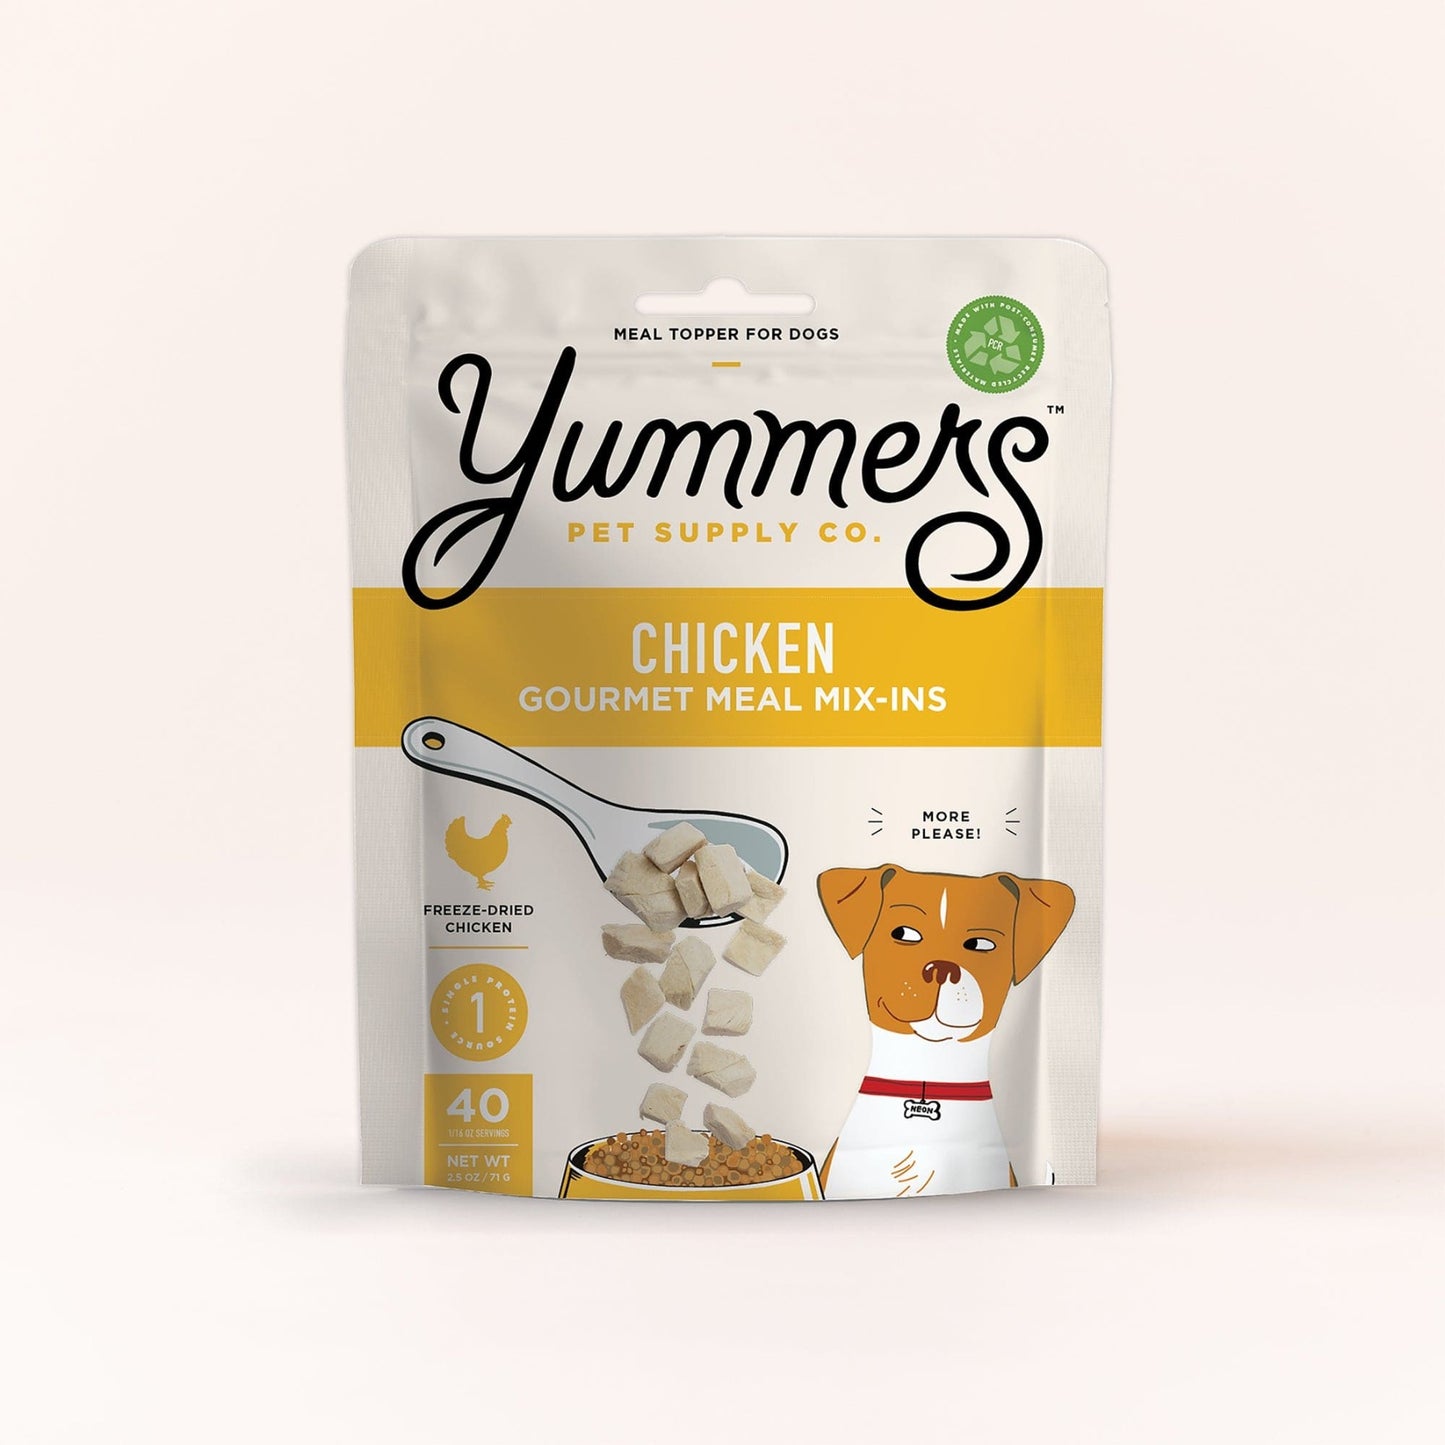 Yummers Freeze-dried Chicken